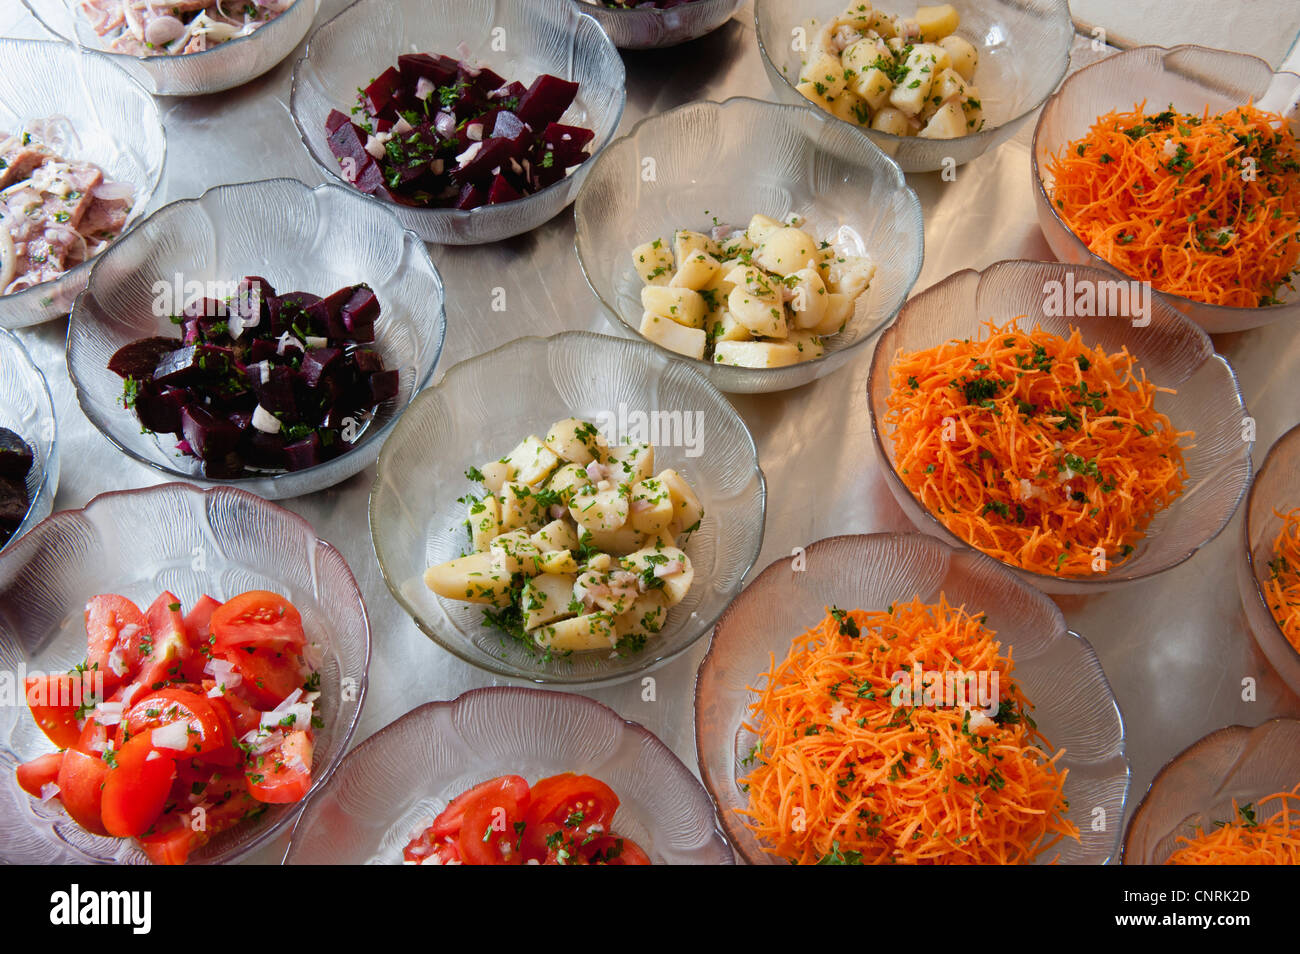 Variety of vegetable salads Stock Photo